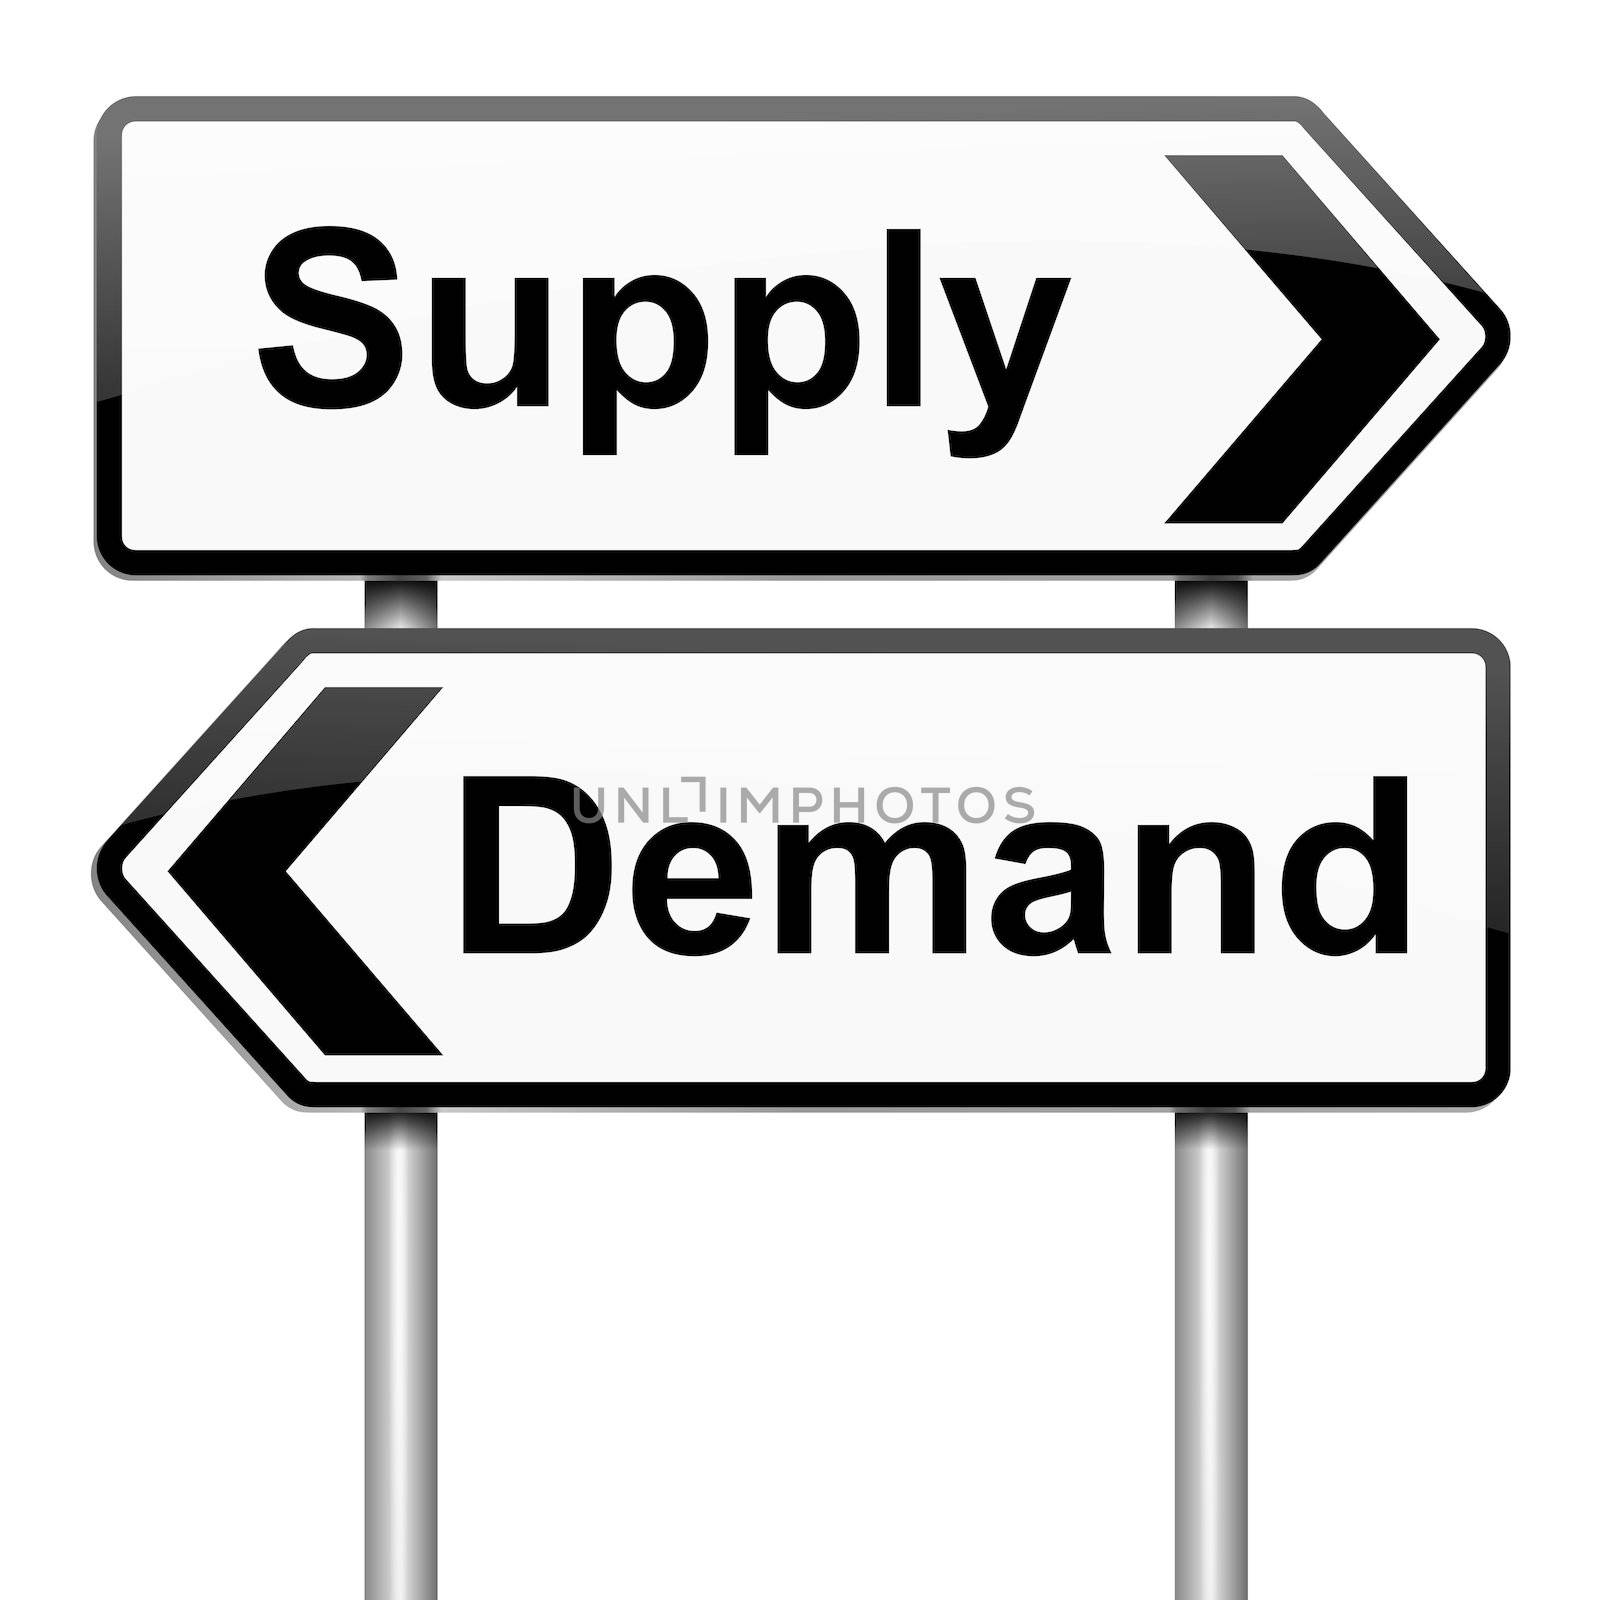 Illustration depicting a roadsign with a supply or demand concept.White background.